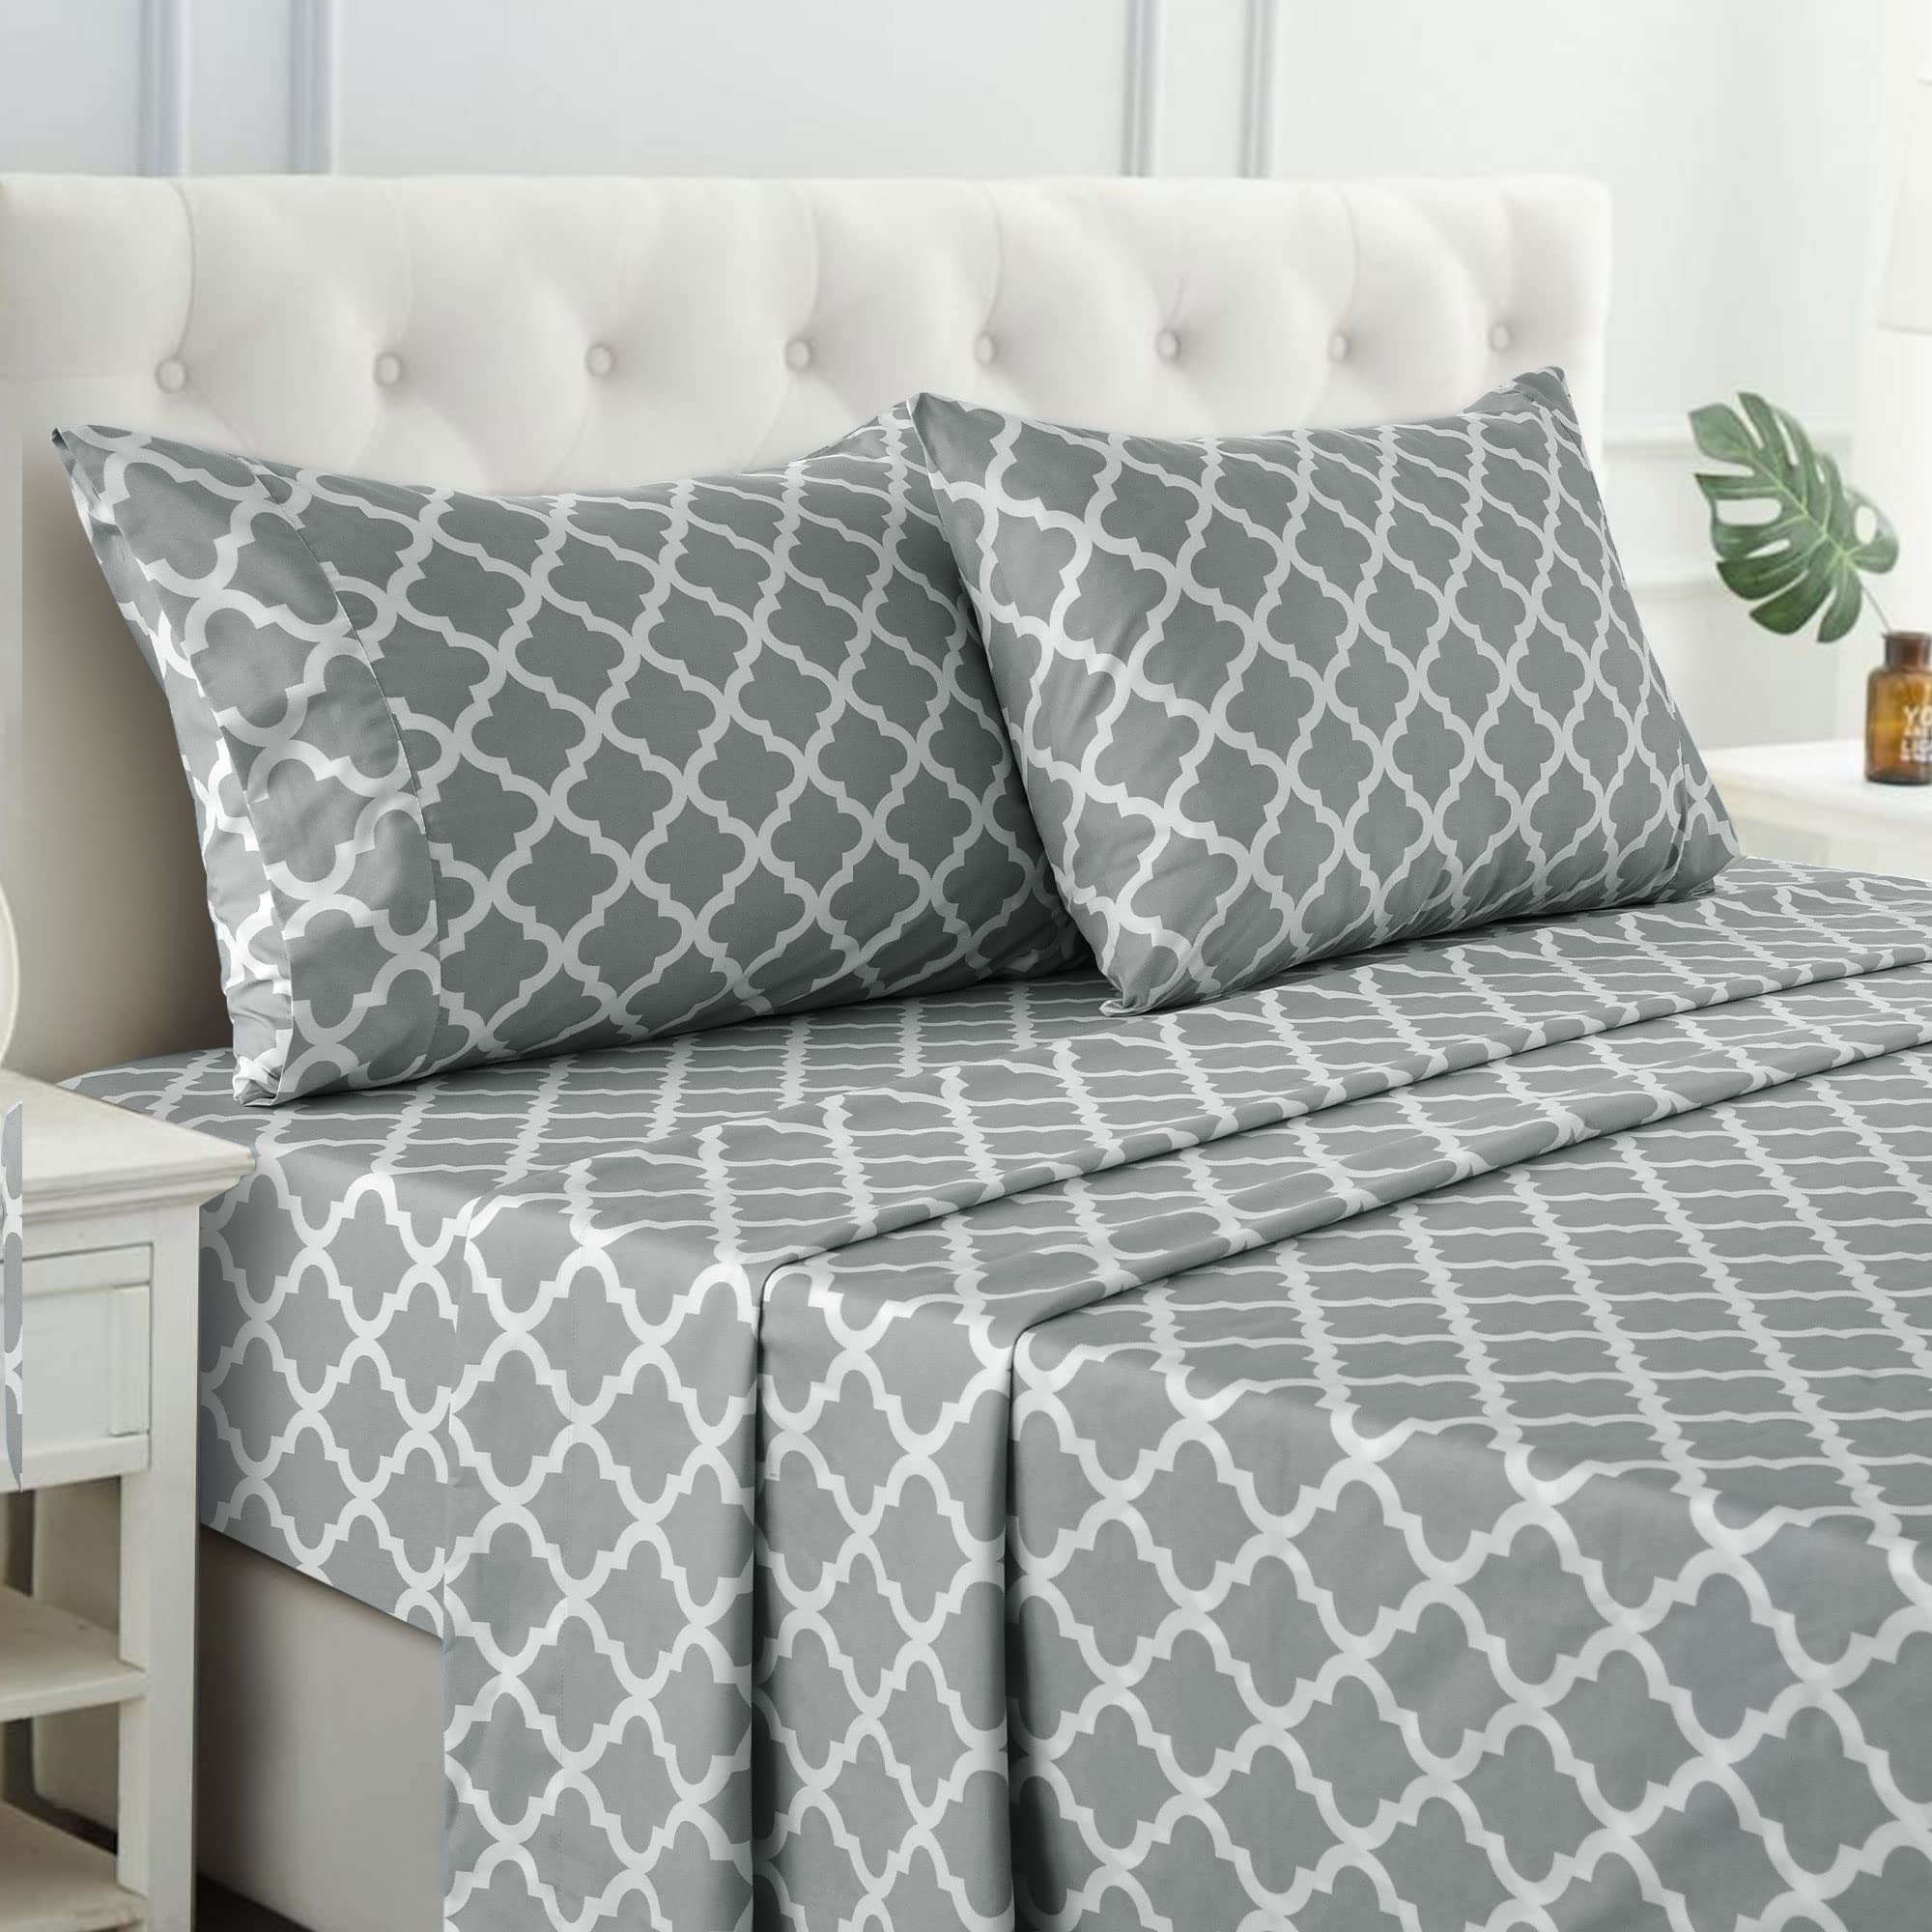 Book Cover Lux Decor Collection Bed Sheets - 4 Pc Queen Size Sheets - 1800 Thread Count Brushed Microfiber Sheets - 16 Inches Deep Pocket Bedding Sheets & Pillowcases (Queen, Quatrefoil Grey) Quatrefoil Grey Queen